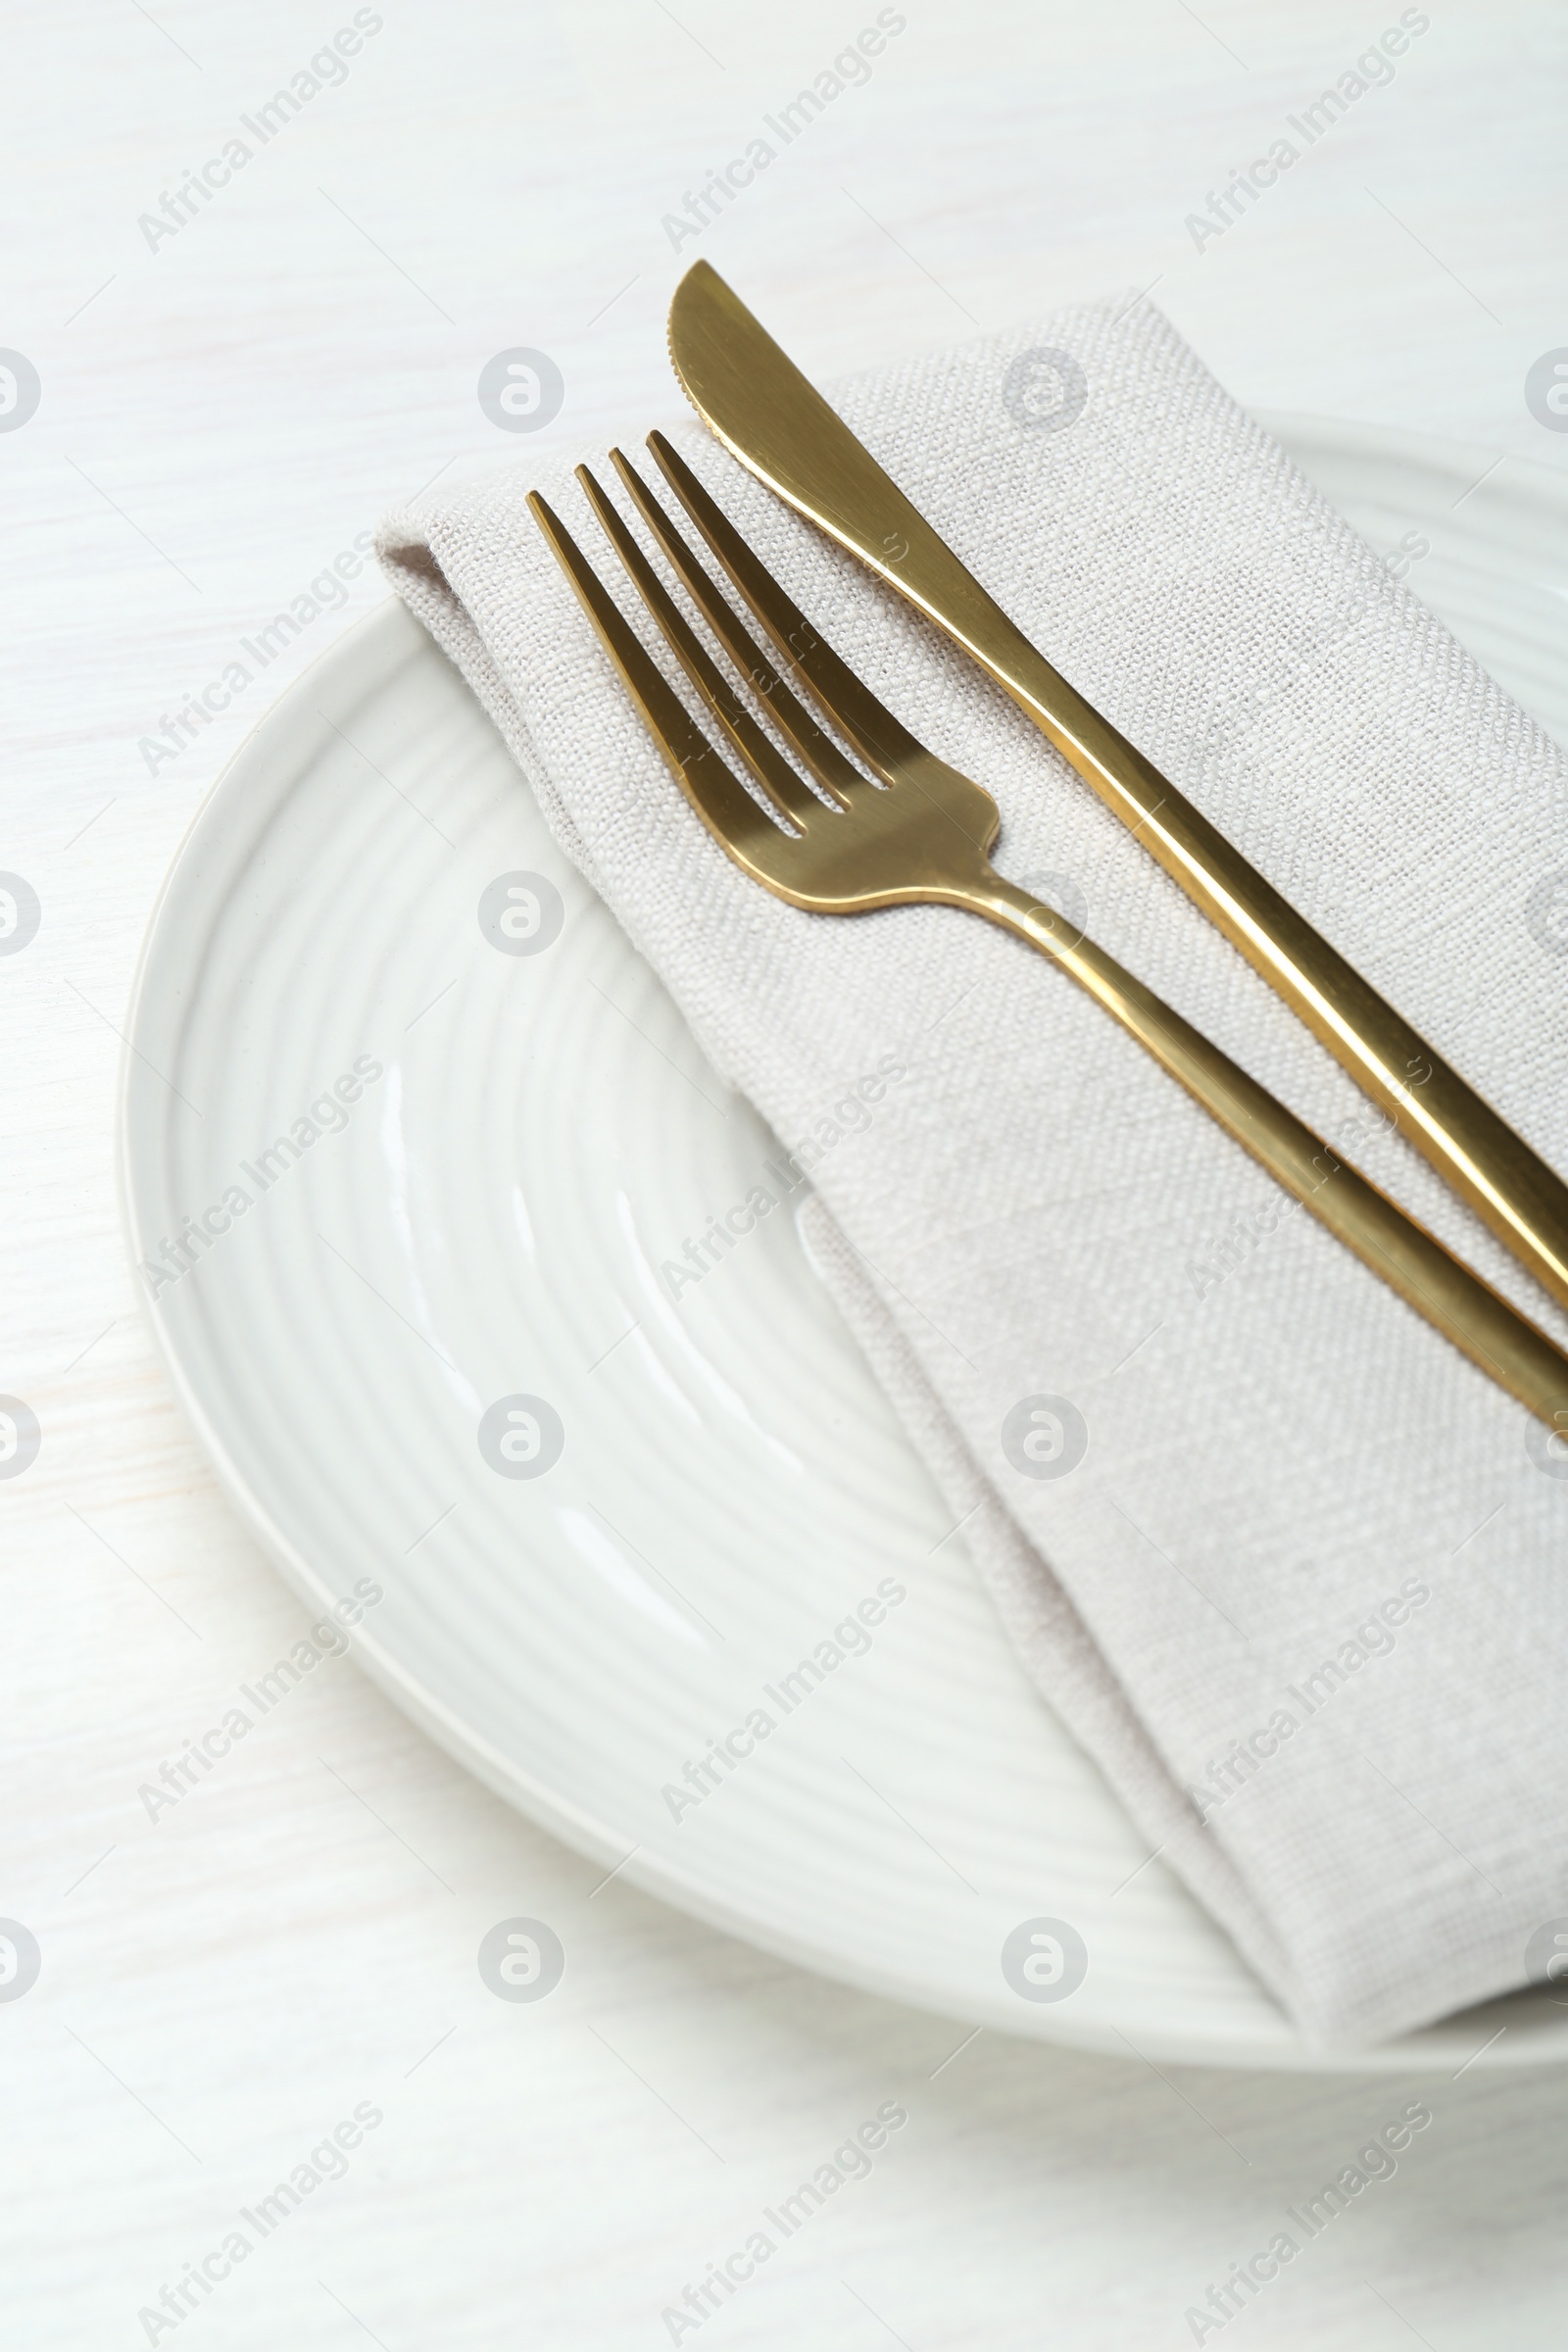 Photo of Stylish ceramic plate, cutlery and napkin on white wooden table, closeup